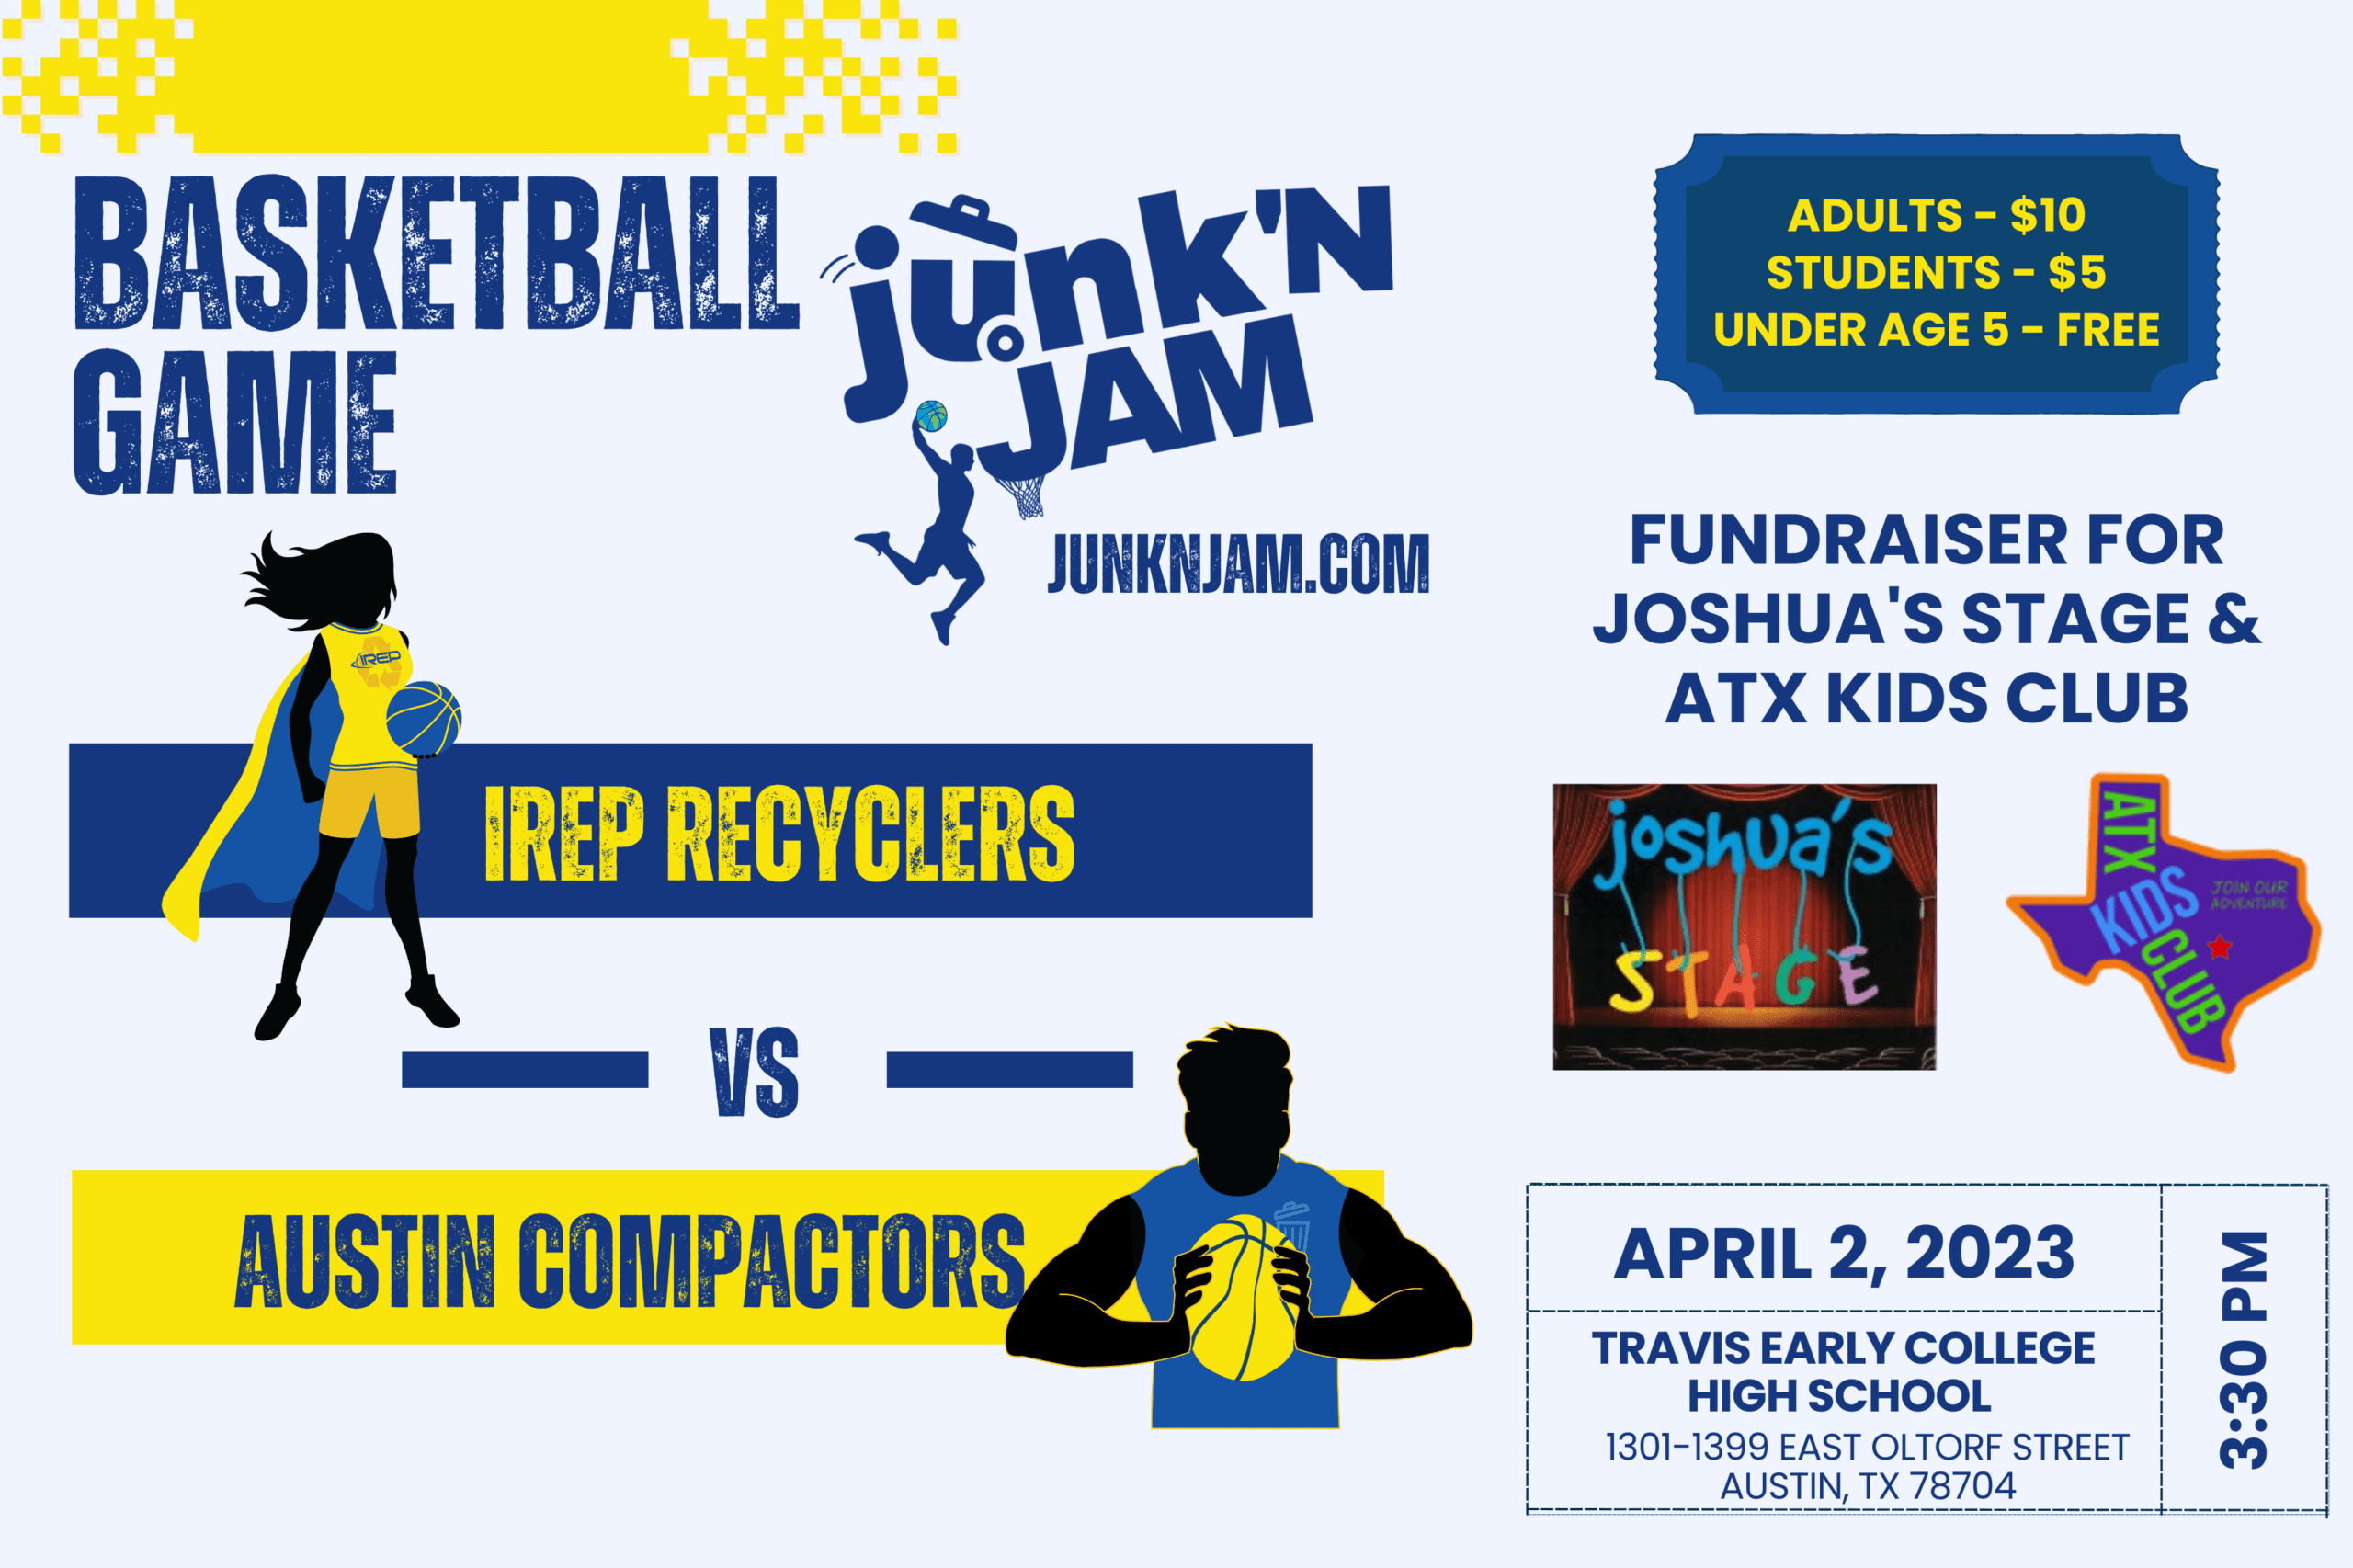 Junk 'N Jam tickets on sale now and still looking for sponsors to support local business and community nonprofits Joshua's Satge and ATX Kids Club at this live basketball game event fundraiser April 2, 2023 in Austin Texas TX on Oltorf and I35 william travis high school early college gym hip hop emcee radio 